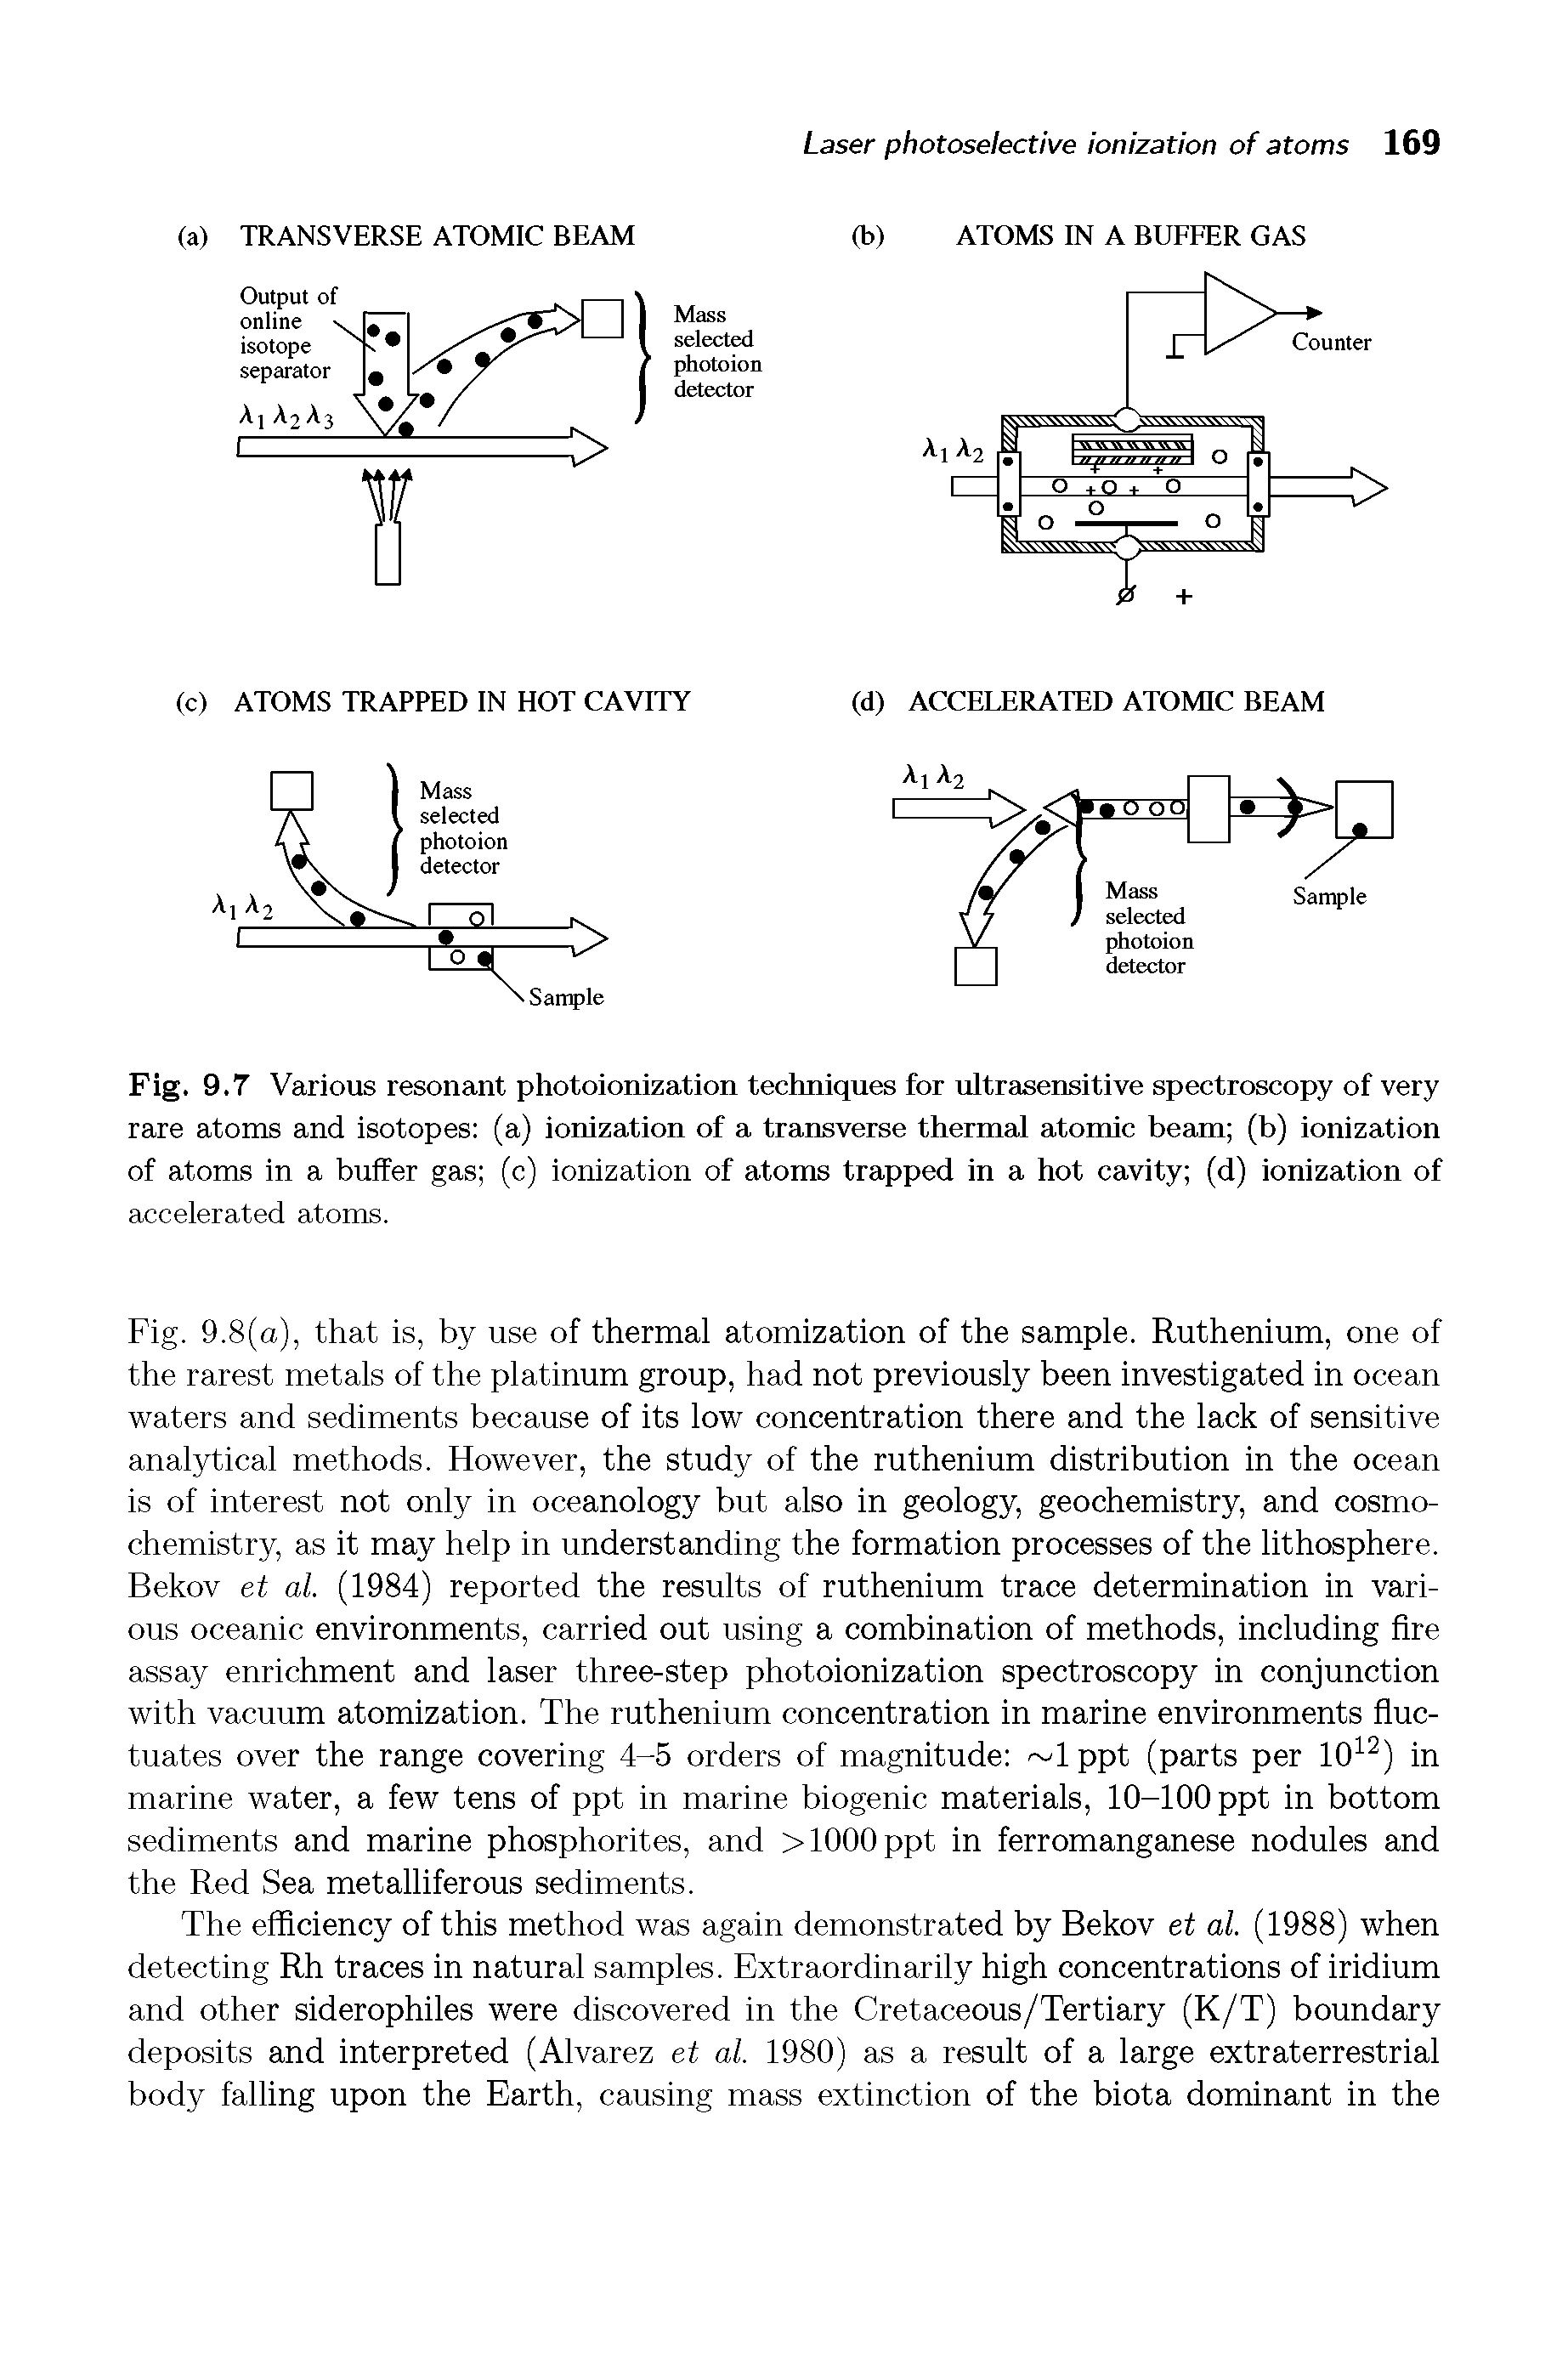 Fig. 9.7 Various resonant photoionization techniques for ultrasensitive spectroscopy of very rare atoms and isotopes (a) ionization of a transverse thermal atomic beam (b) ionization of atoms in a buffer gas (c) ionization of atoms trapped in a hot cavity (d) ionization of...